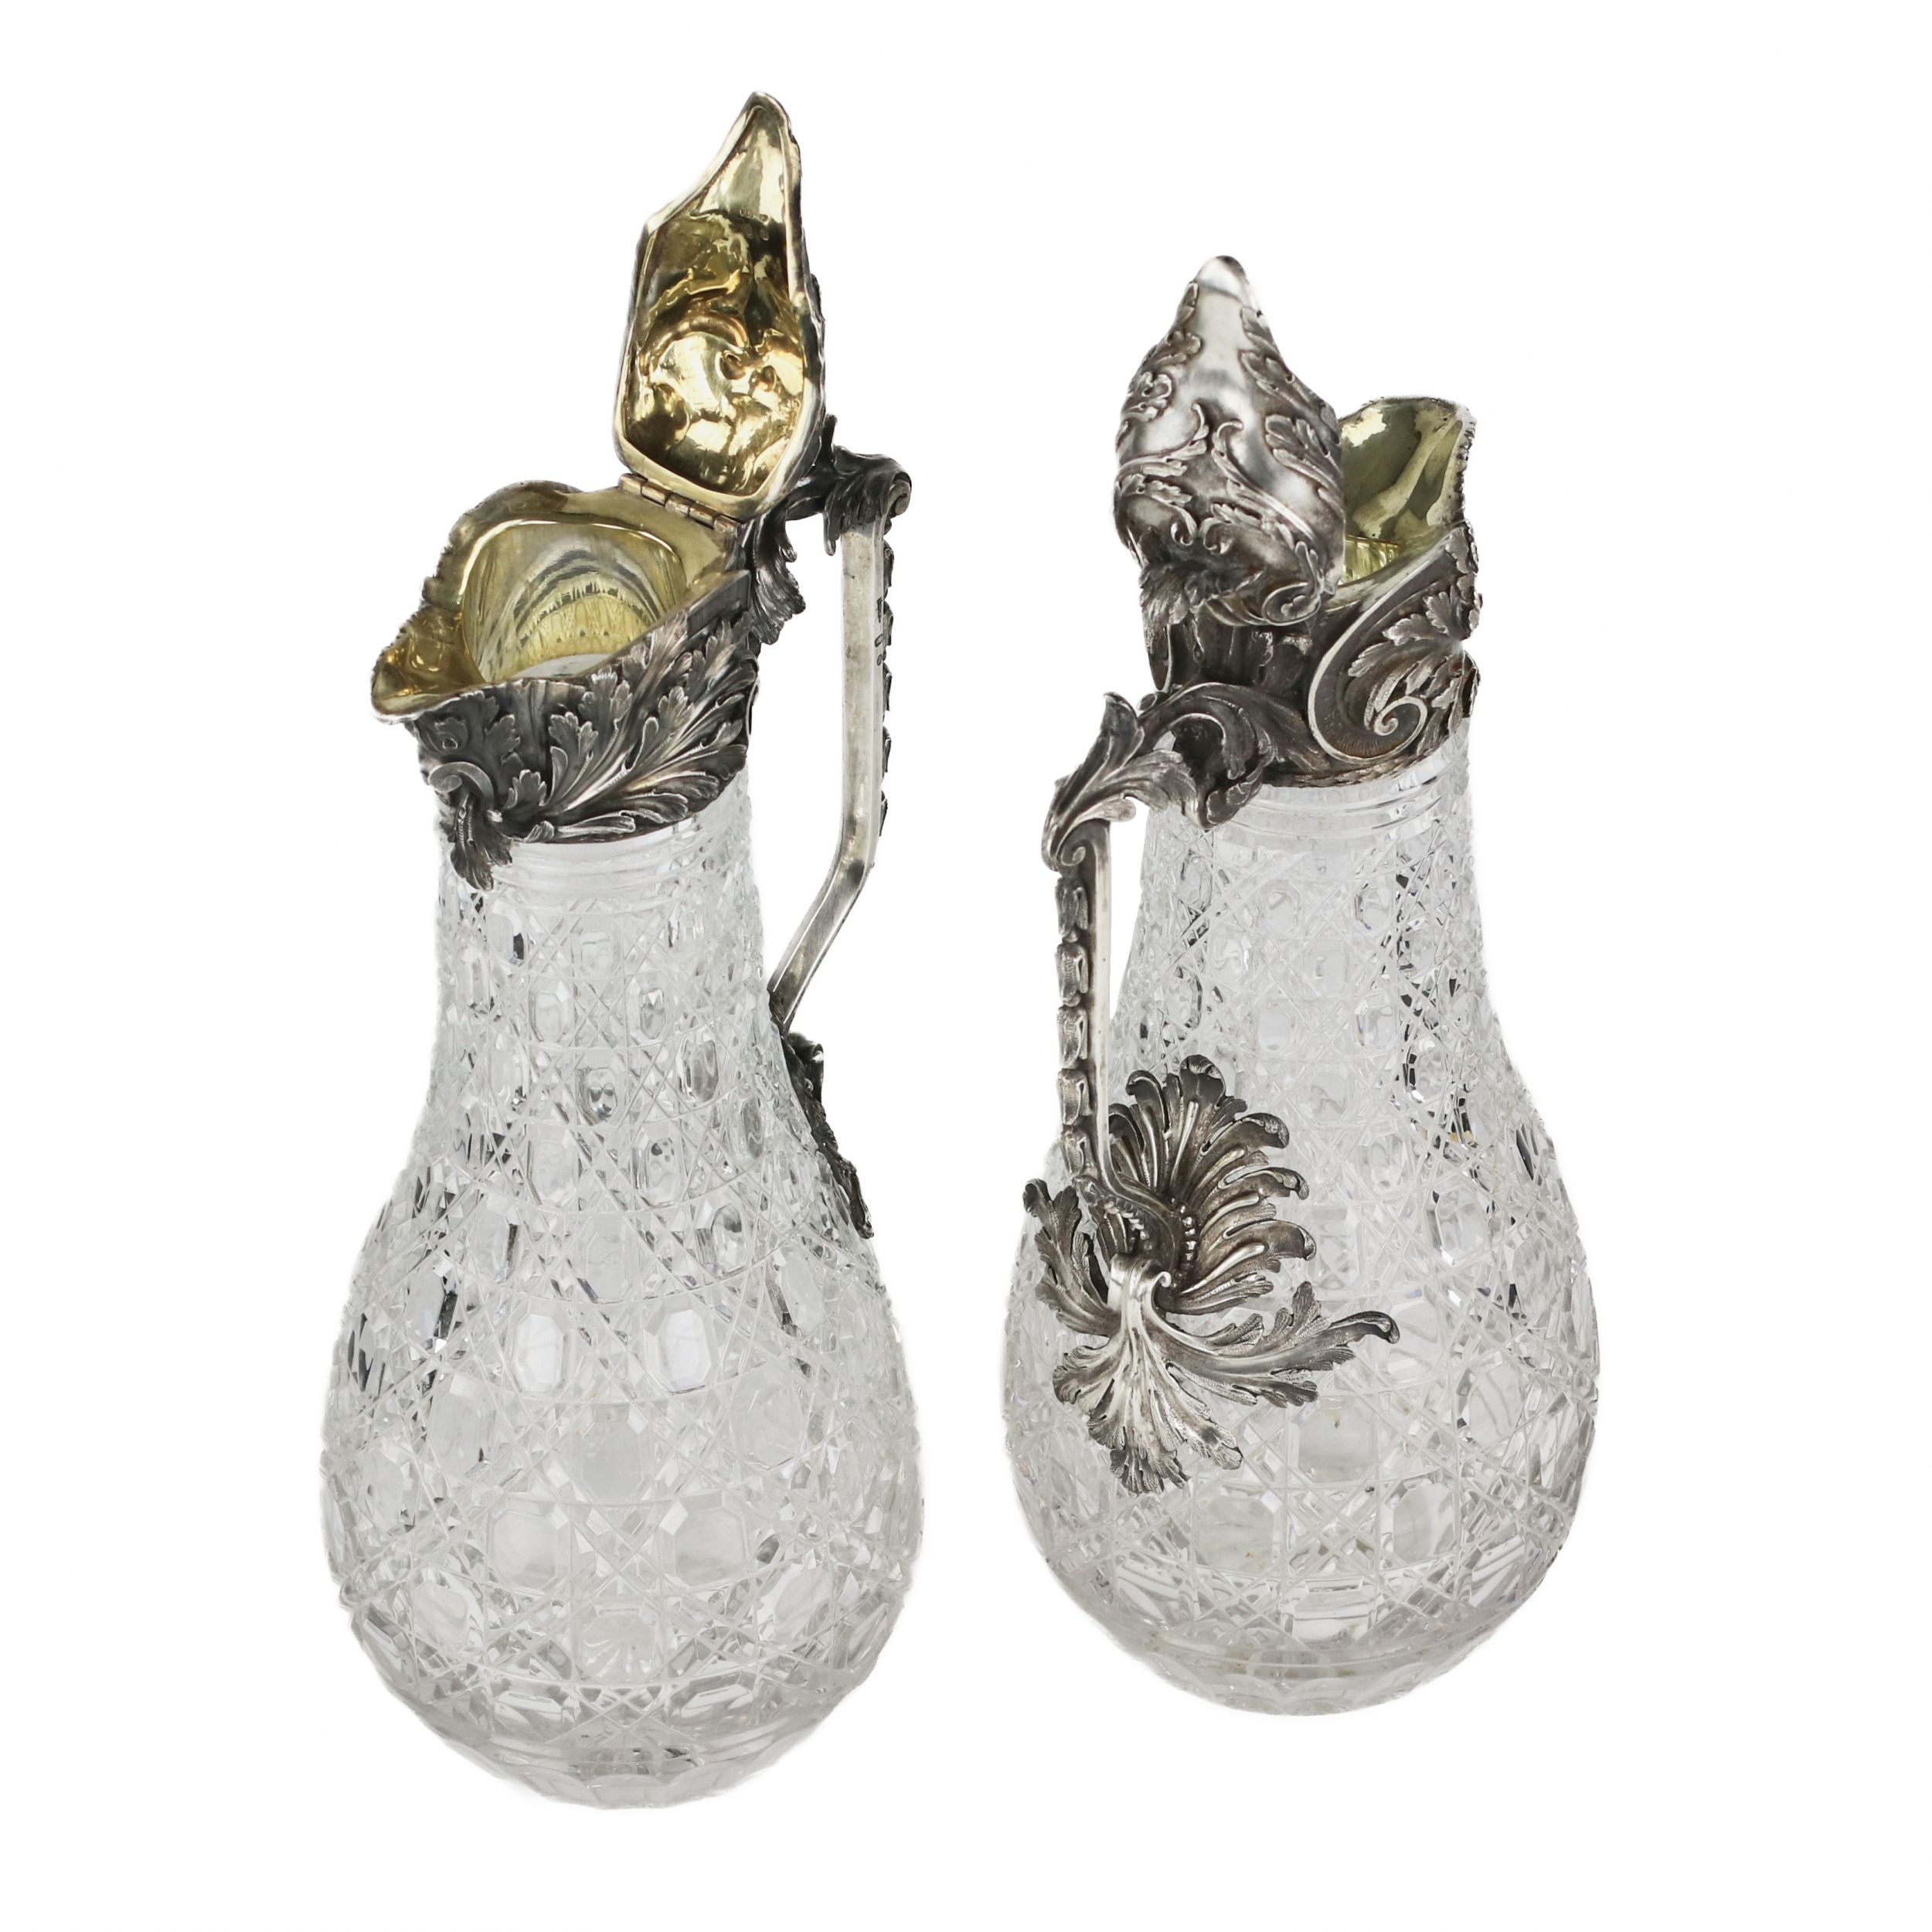 A magnificent pair of cast crystal wine jugs in superb BOLIN silver. Moscow. Russia 19th century. - Image 4 of 7